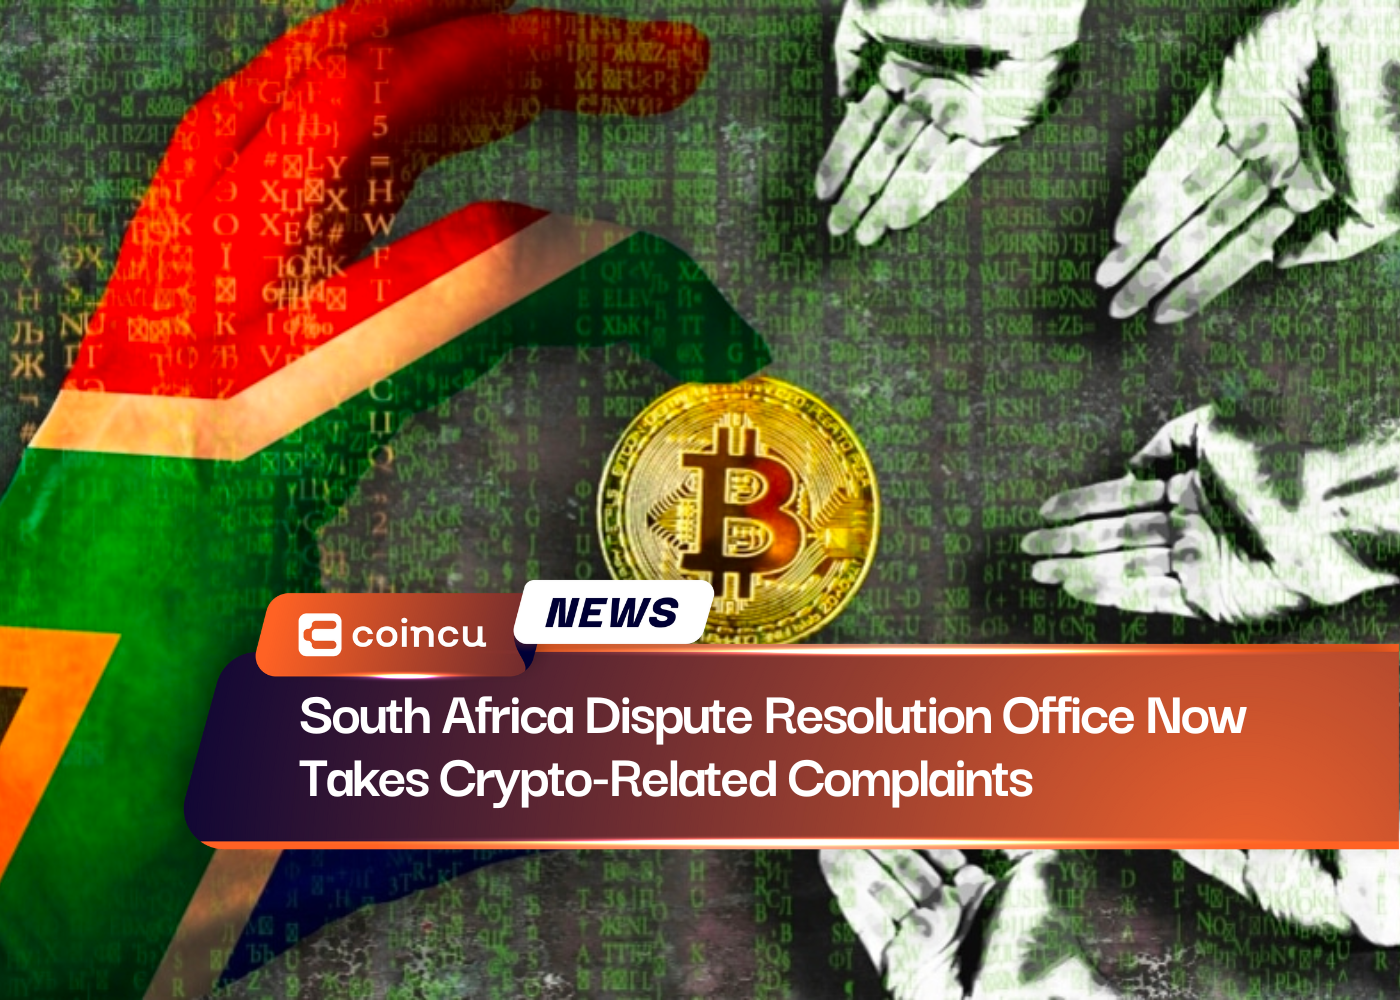 South Africa Dispute Resolution Office Now Takes Crypto-Related Complaints